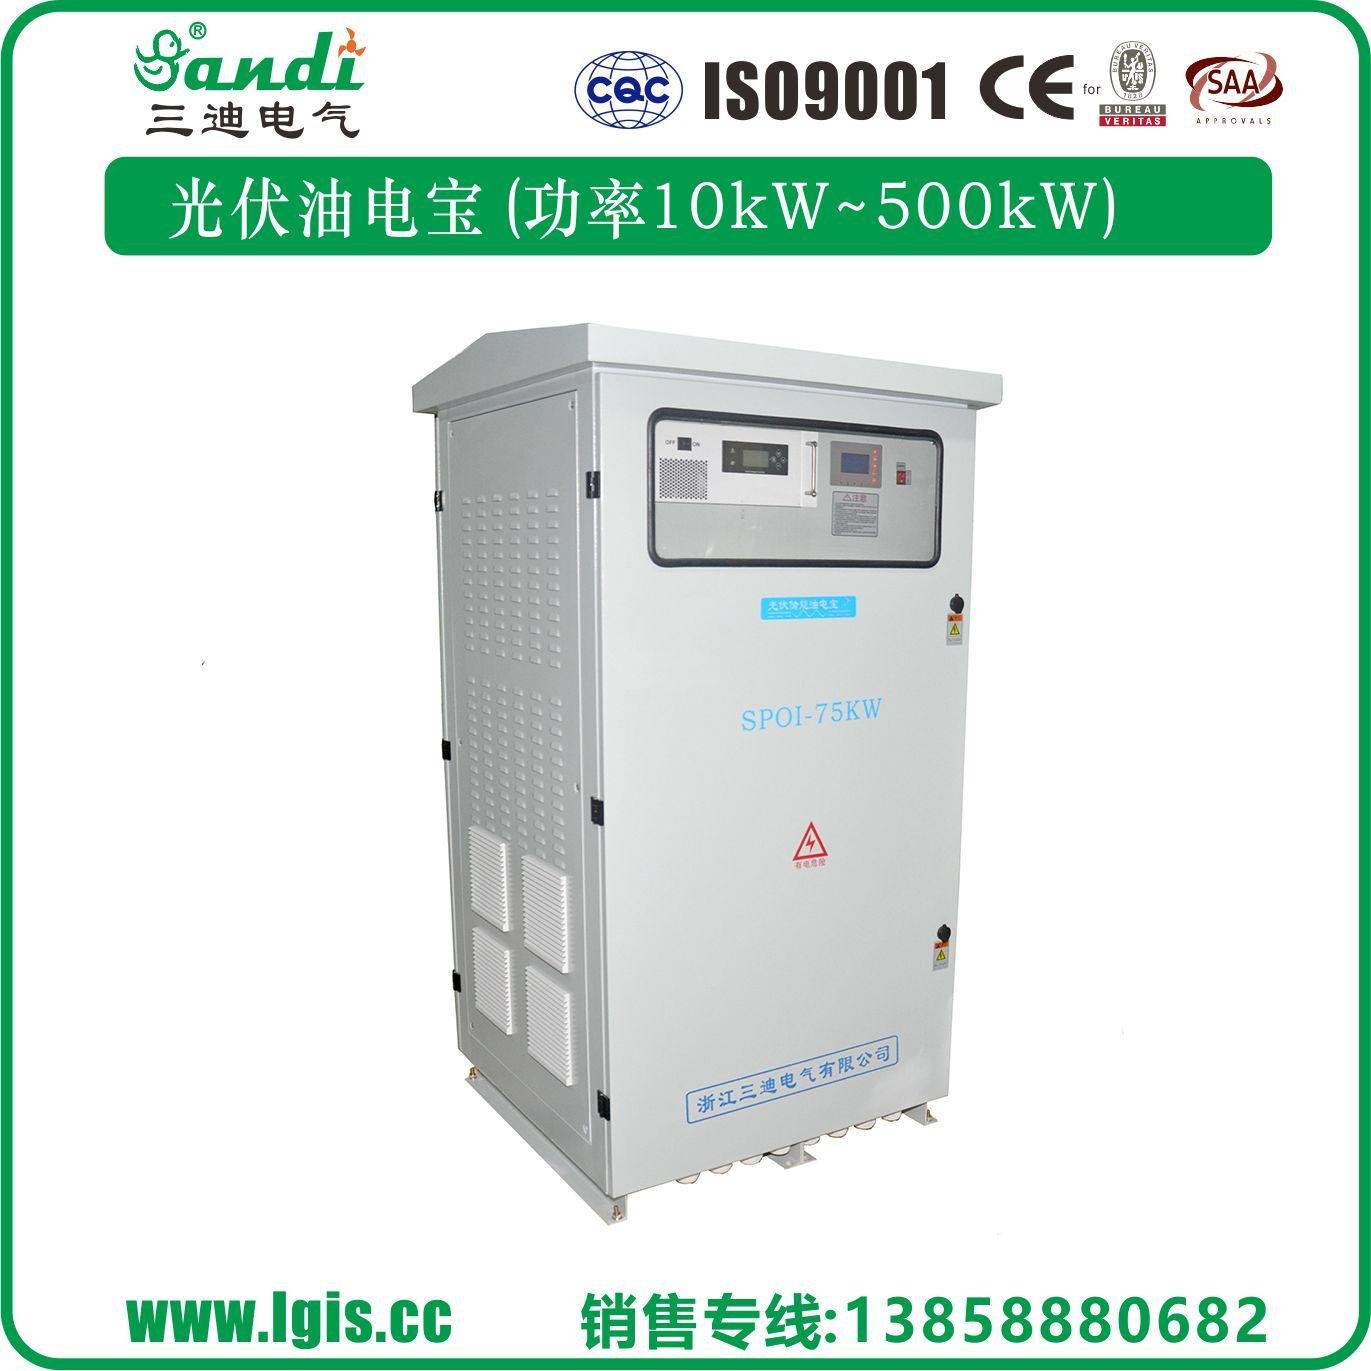 75KW Special power inverter for oilfield pumping unit (spoi-75kw)